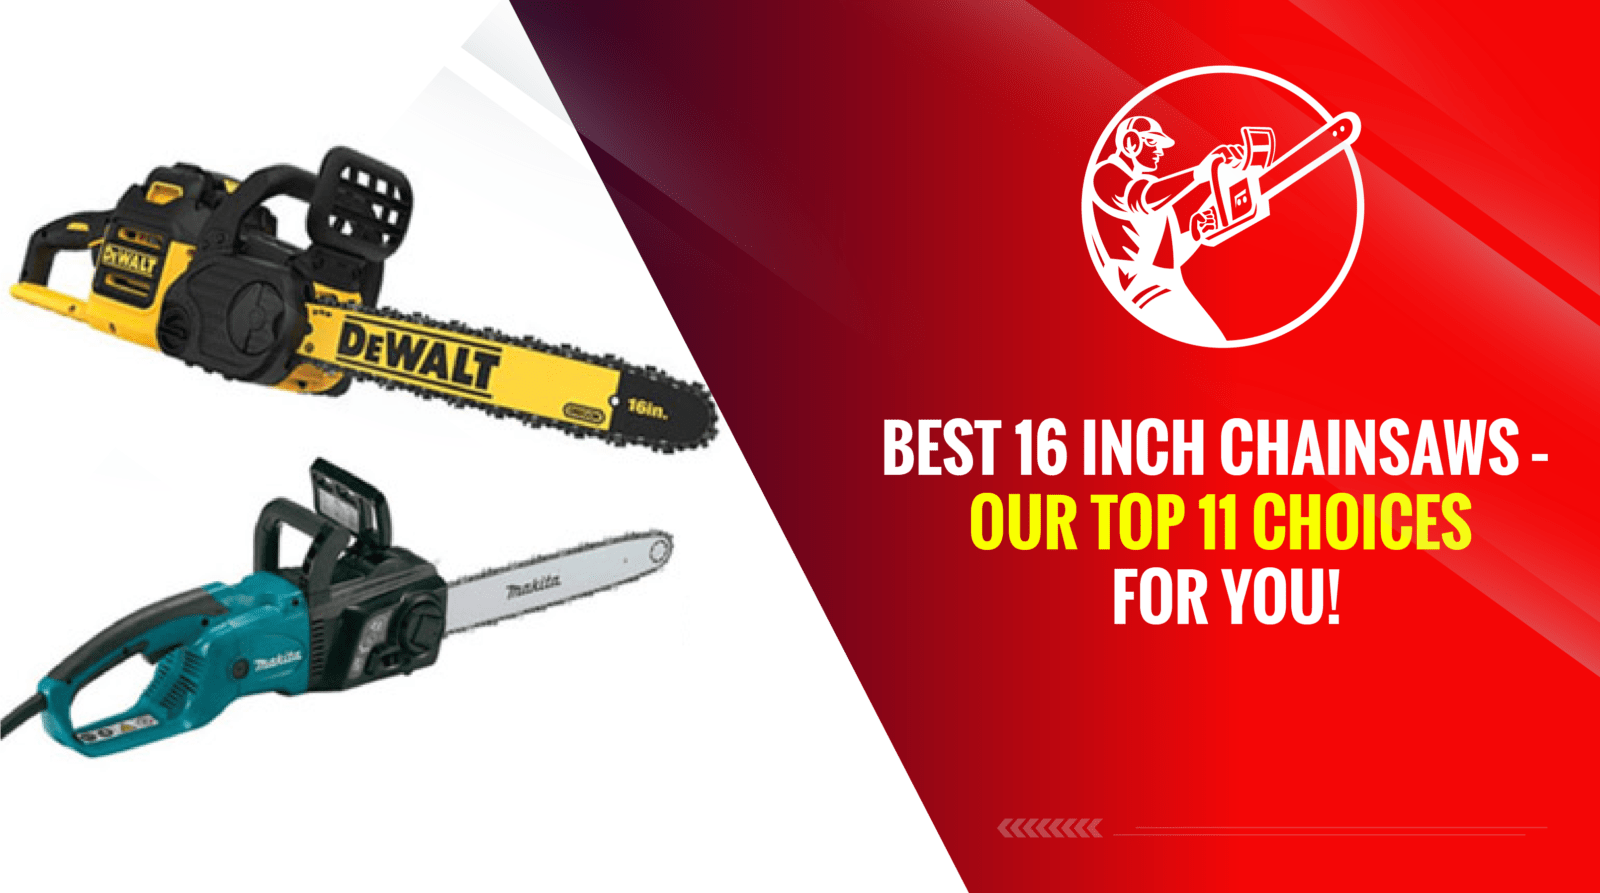 Best 16 Inch Chainsaws – Our Top 11 Choices For You!